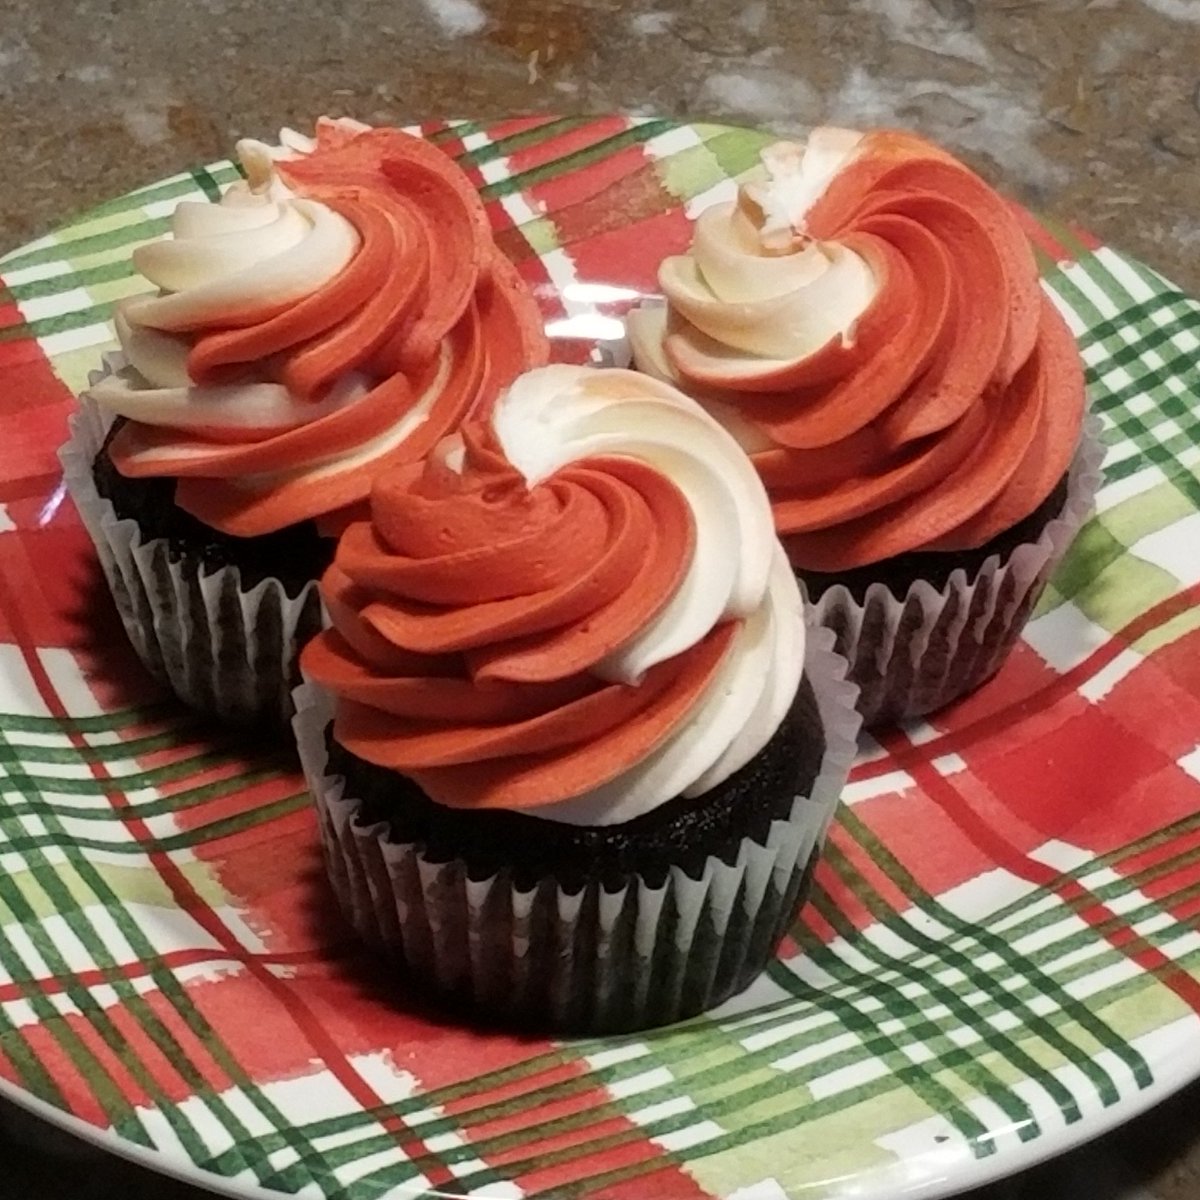 GLUTEN FREE dark chocolate fudge cupcakes with red and white swirl buttercream. I have GF sprinkles too, if you like a little crunch. 

#CAKEBUS #FlourChildCreations #topthat #onlyinwanaming #cupcakeoftheday #cakeeveryday #indulge  #bakingtherapy #glutenfree #chocolate